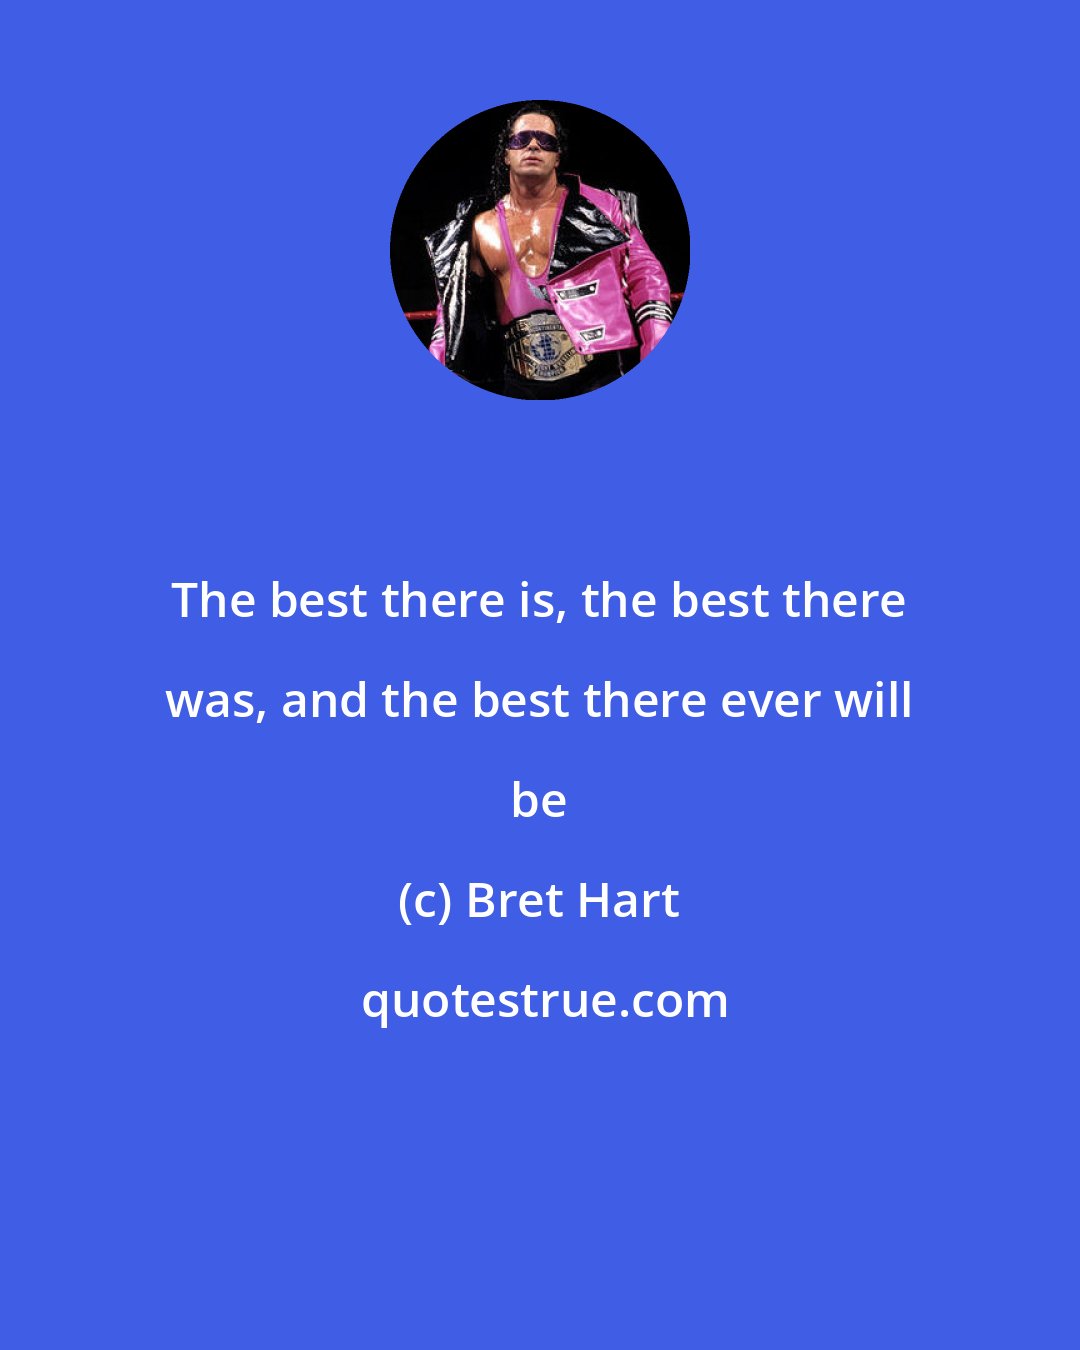 Bret Hart: The best there is, the best there was, and the best there ever will be